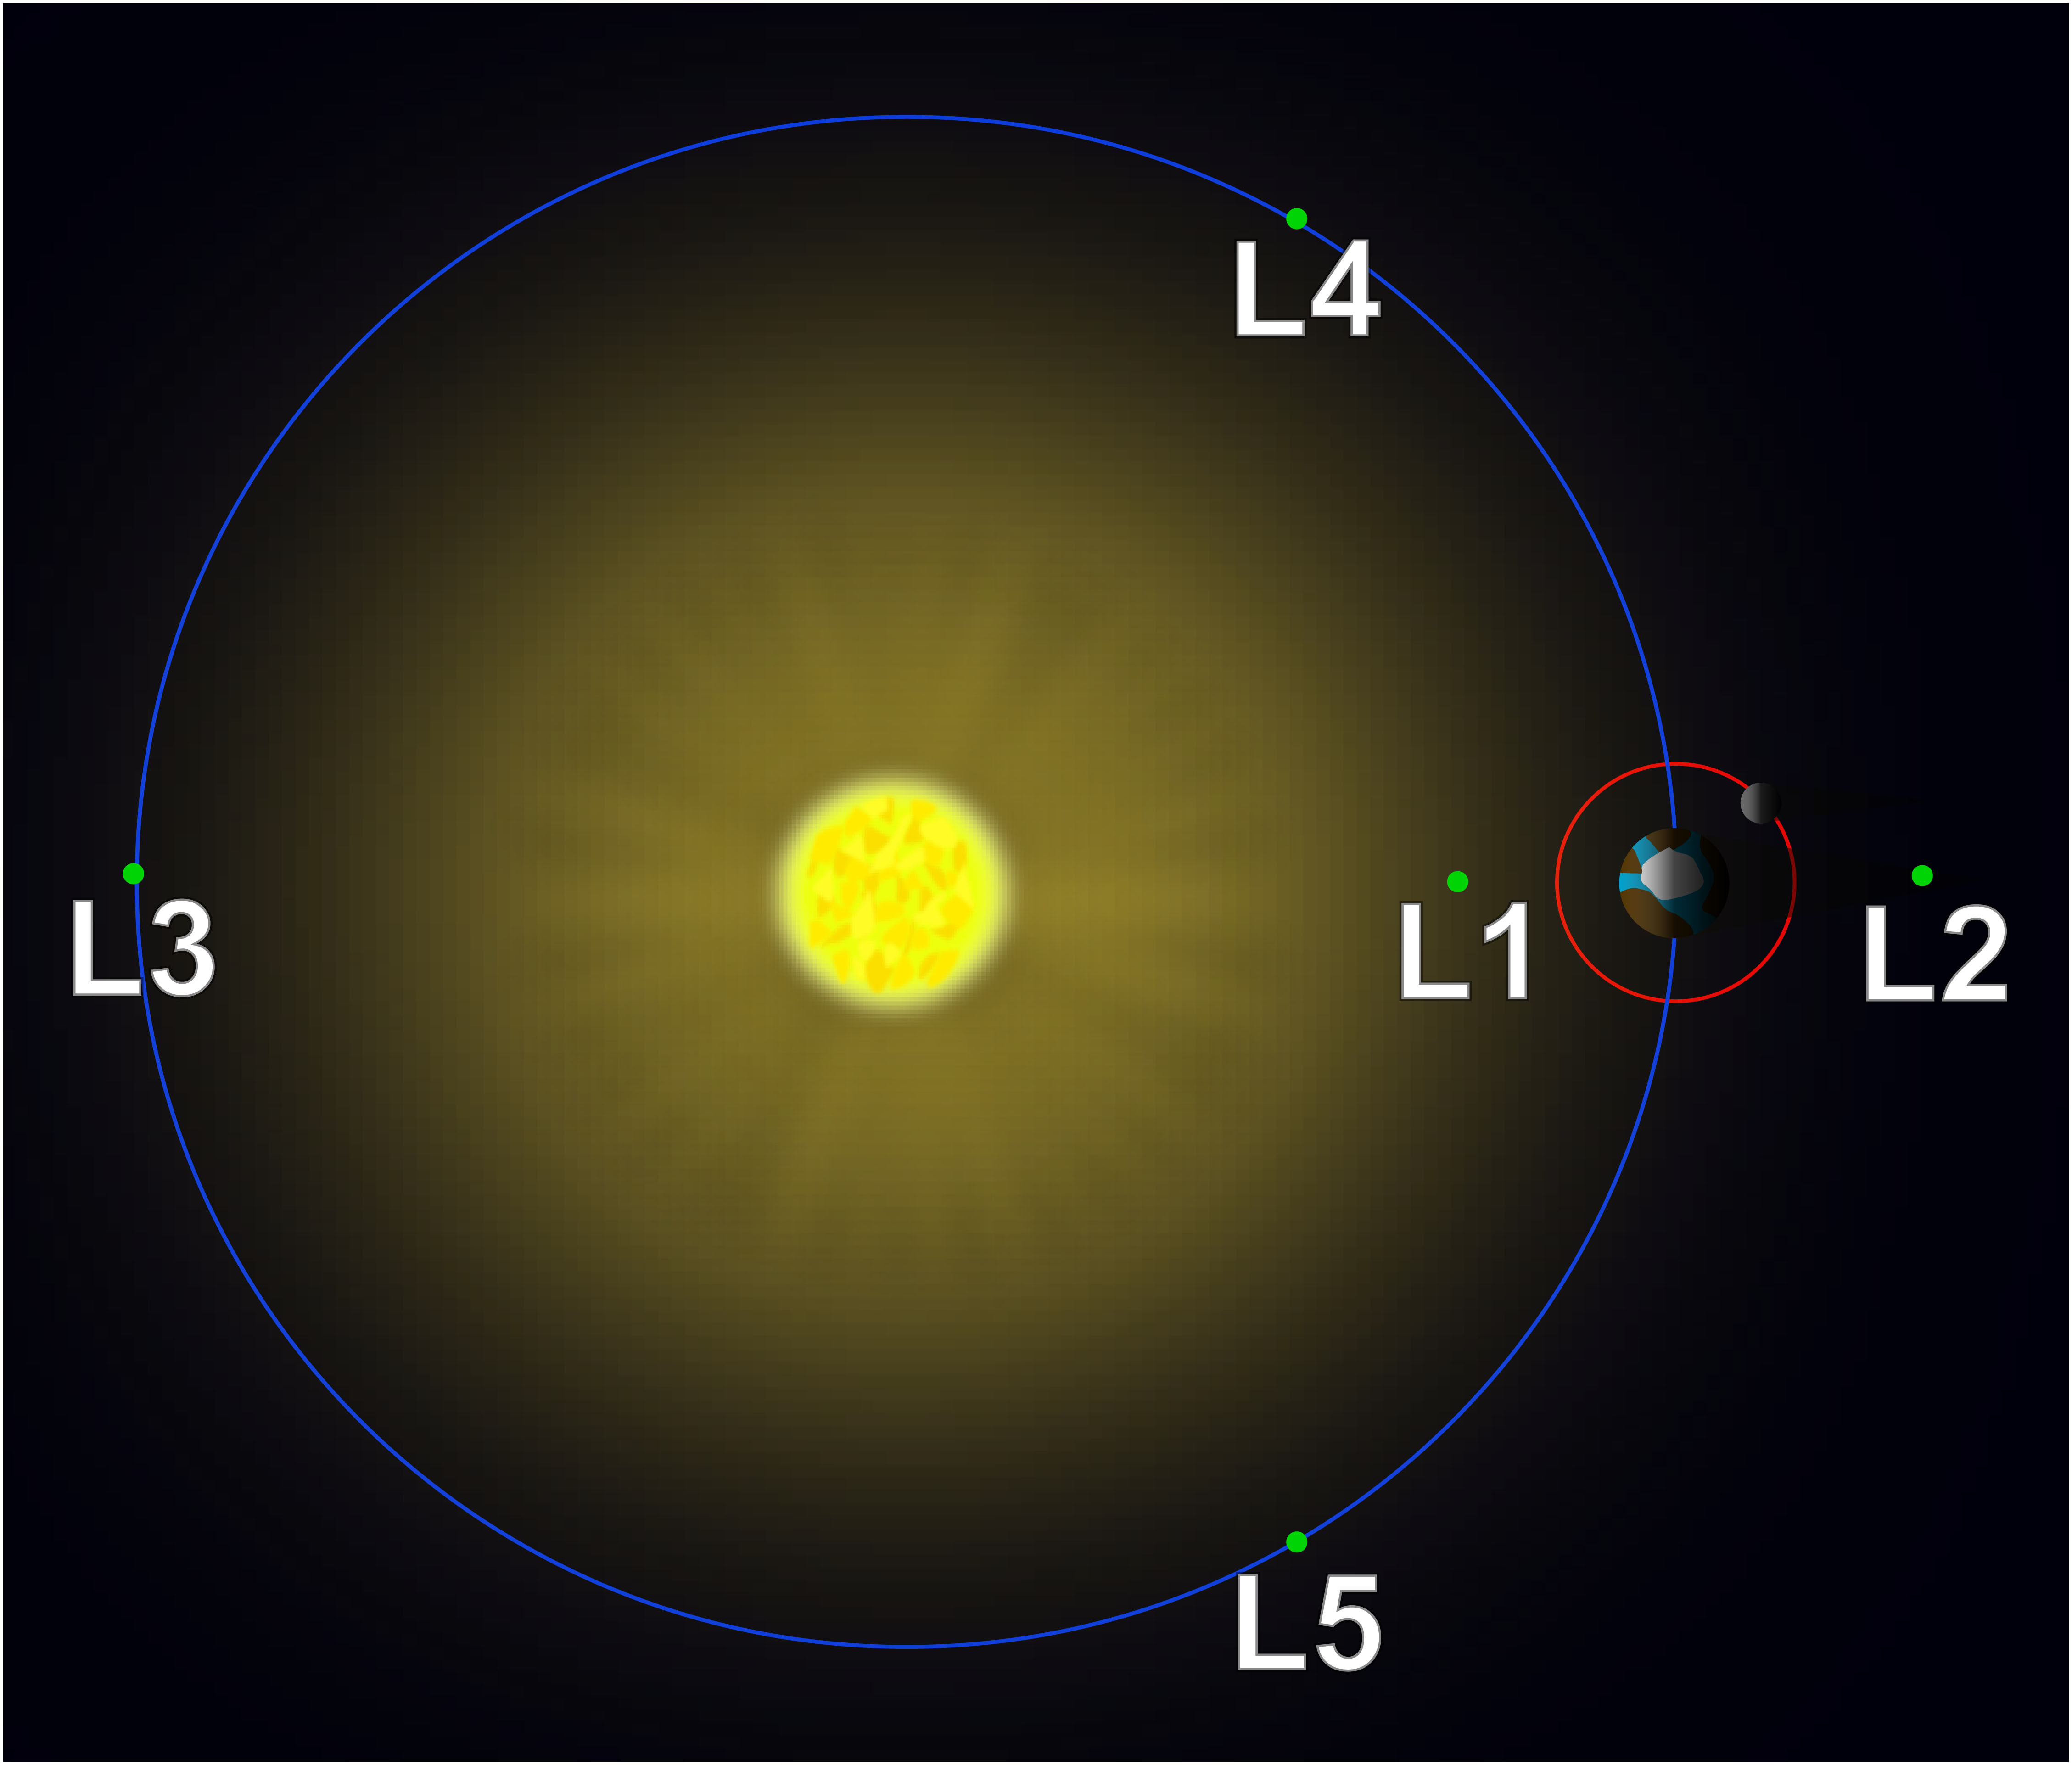 The Lagrange Points are islands of stability between the Sun and a planet where the gravitational forces are in balance. https://commons.wikimedia.org/wiki/File:Lagrange_points_simple.svg